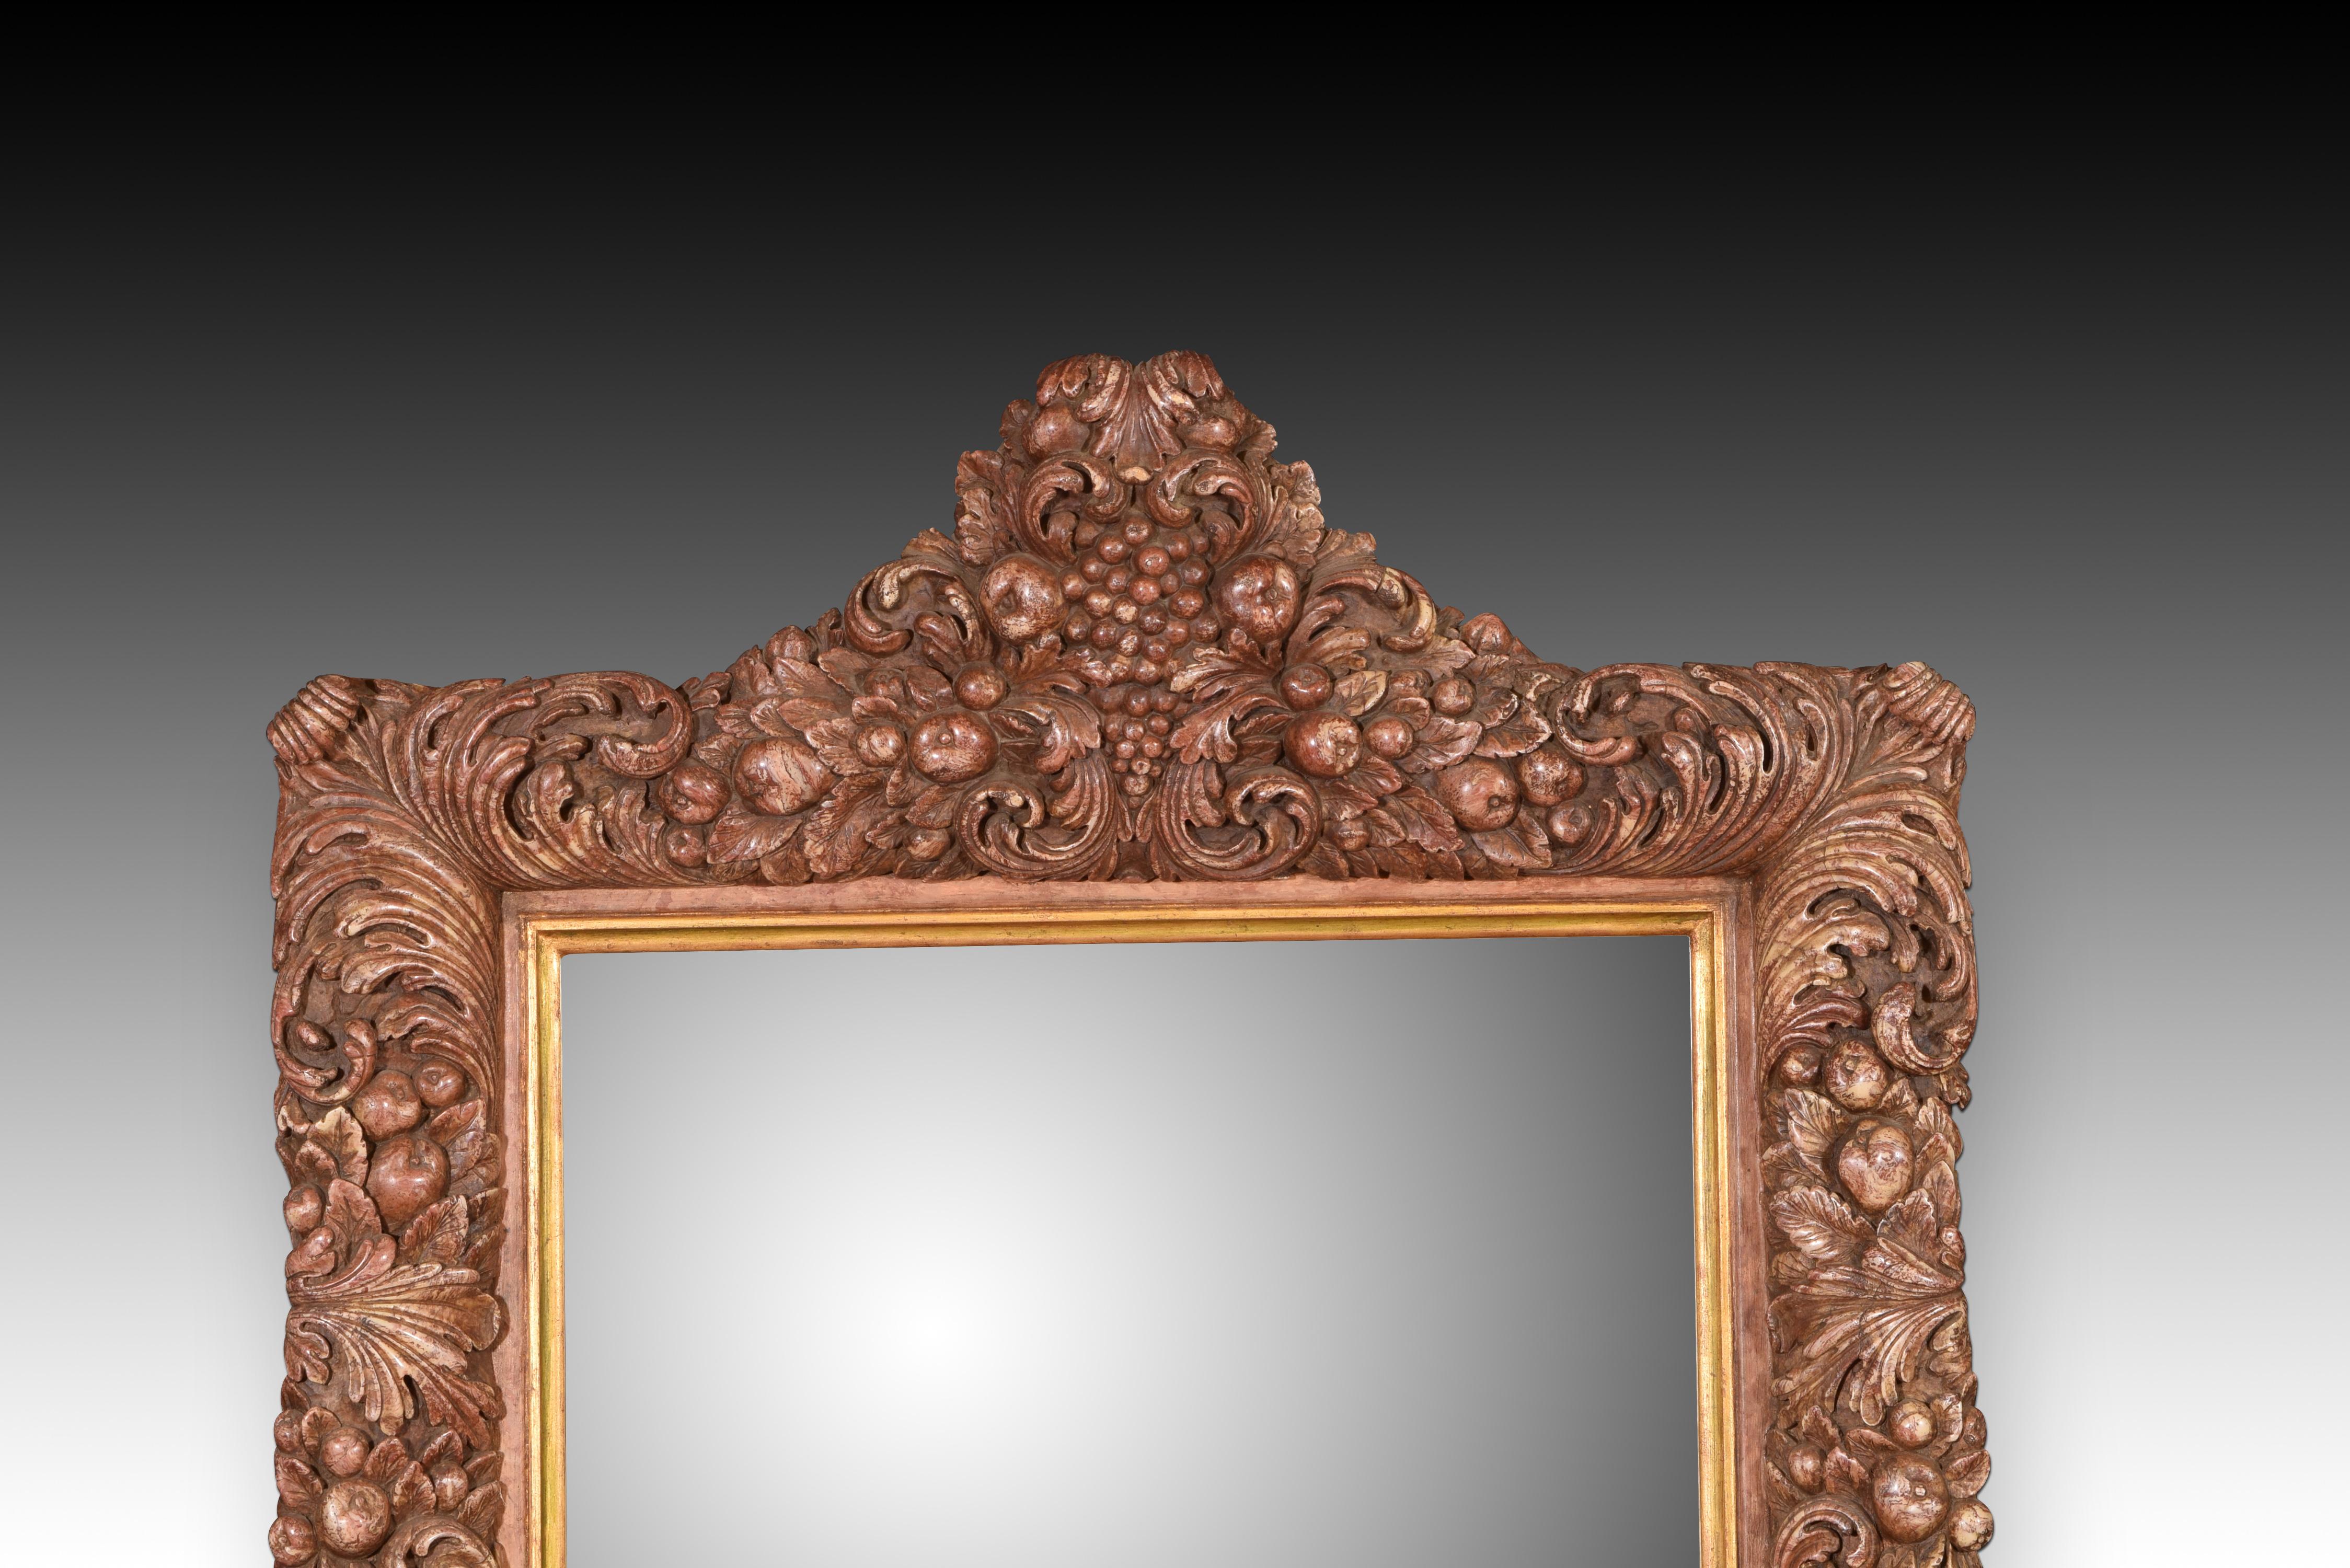 Wall mirror. Modeled alabaster. 20th century.  

Wall mirror with a frame made of modeled alabaster with polychrome, which has a decoration that resembles carvings based on plant and fruit elements, with a crest on the top. The work is inspired by